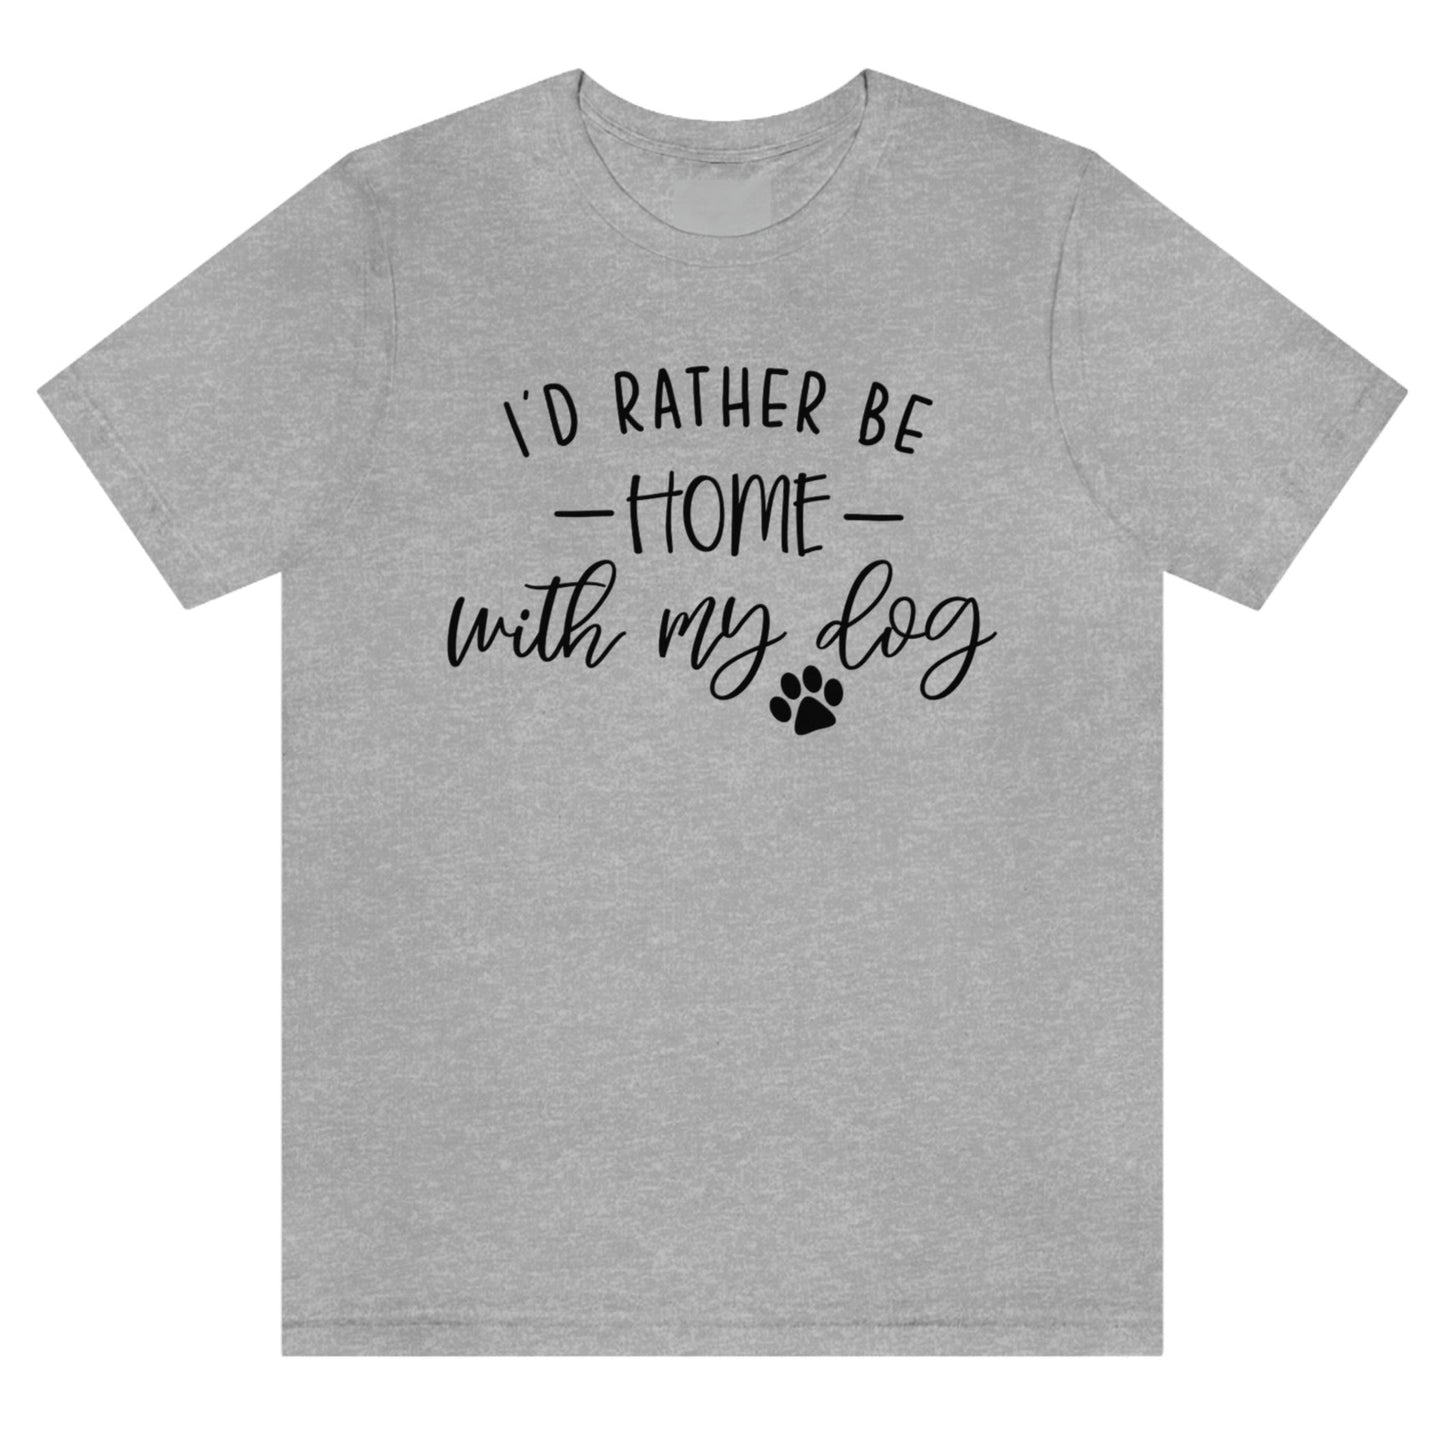 id-rather-be-home-with-my-dog-athletic-heather-grey-t-shirt-animal-lover